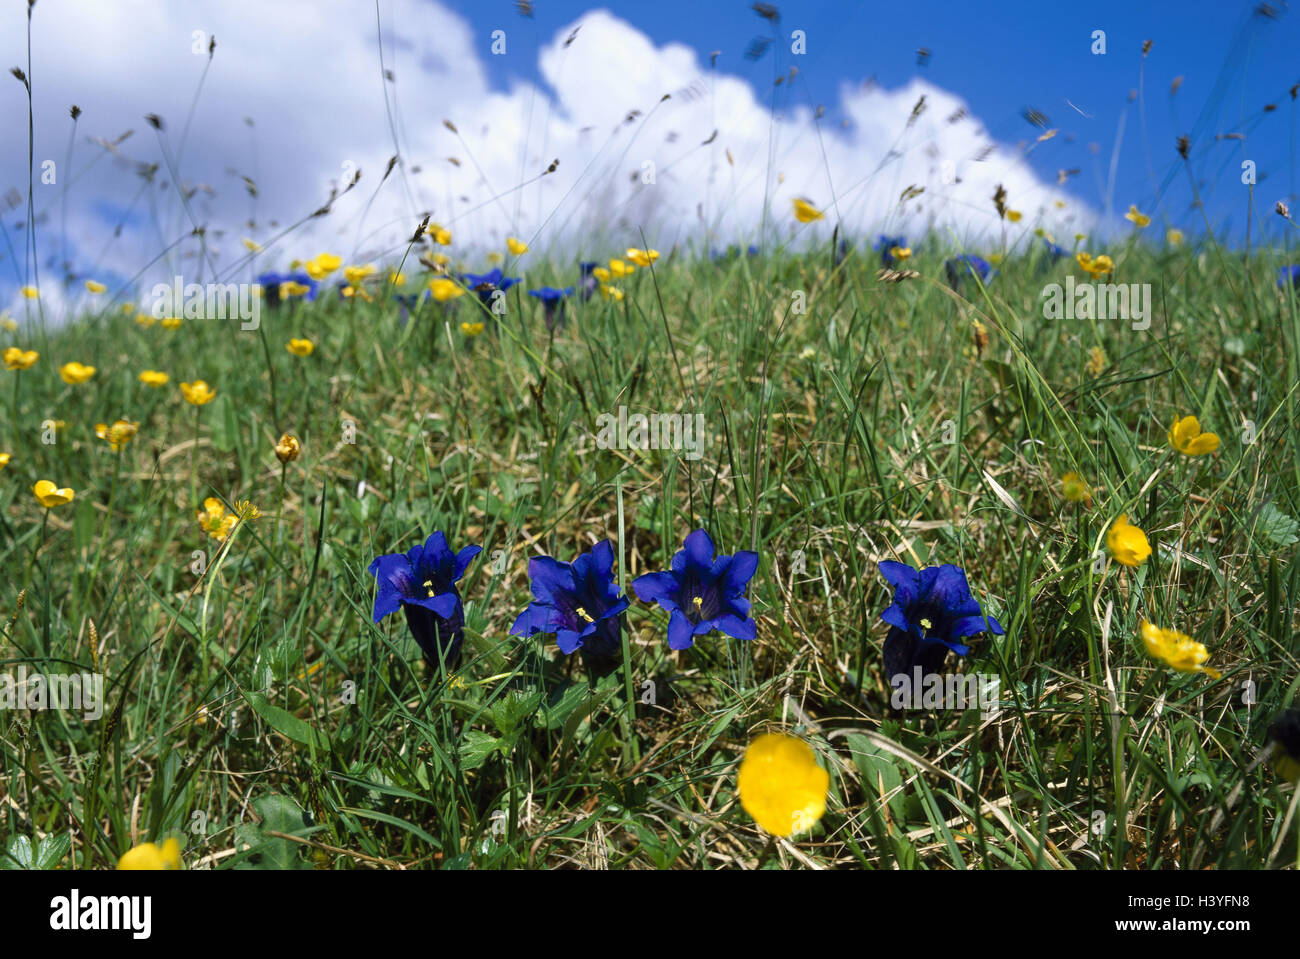 Mountain pasture, stalk batches gentians, Gentiana acaulis, mountain region, meadow, flower meadow, nature, botany, flora, vegetation, flowers, Alpine flowers, alp flower, gentian, gentian blossoms, blossoms, blossom blue, nature conservation, scenery, season, spring, cloudy sky, period bloom, from April to August Stock Photo